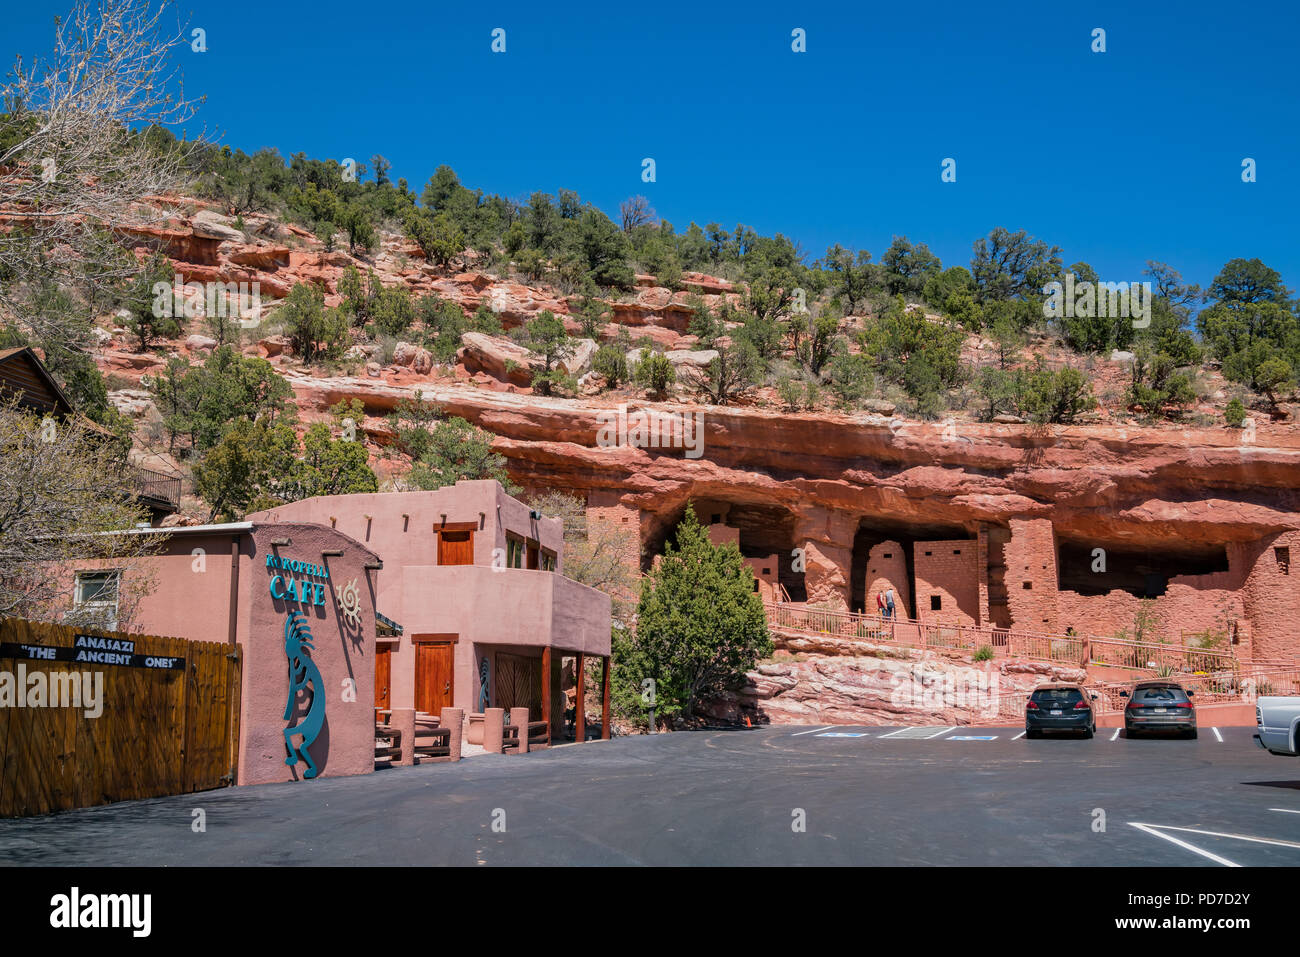 Manitou Springs, MAY 4: The special Manitou Cliff Dwellings museum on MAY 4, 2017 at Manitou Springs, Colorado Stock Photo